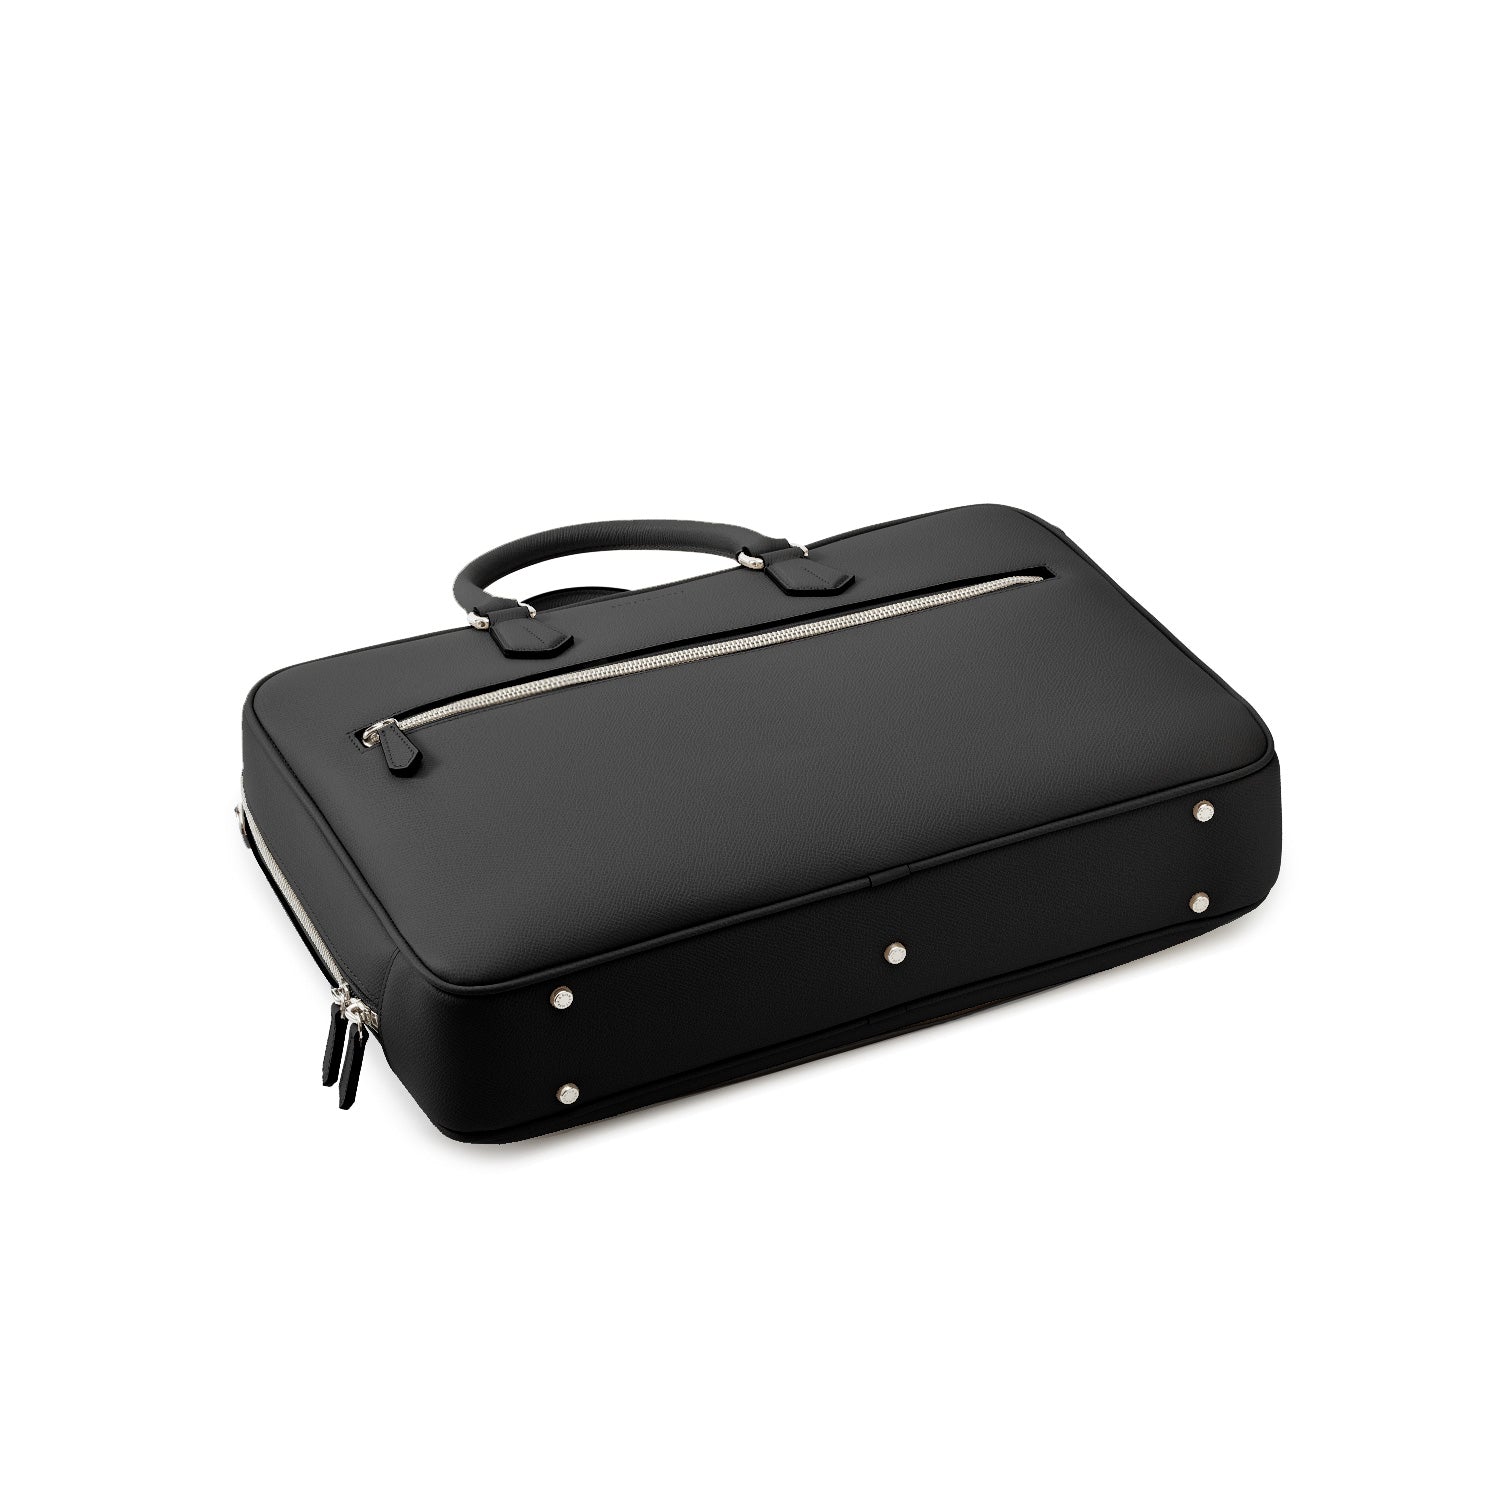 Jackson Briefcase Type 2 Noblesse Leather